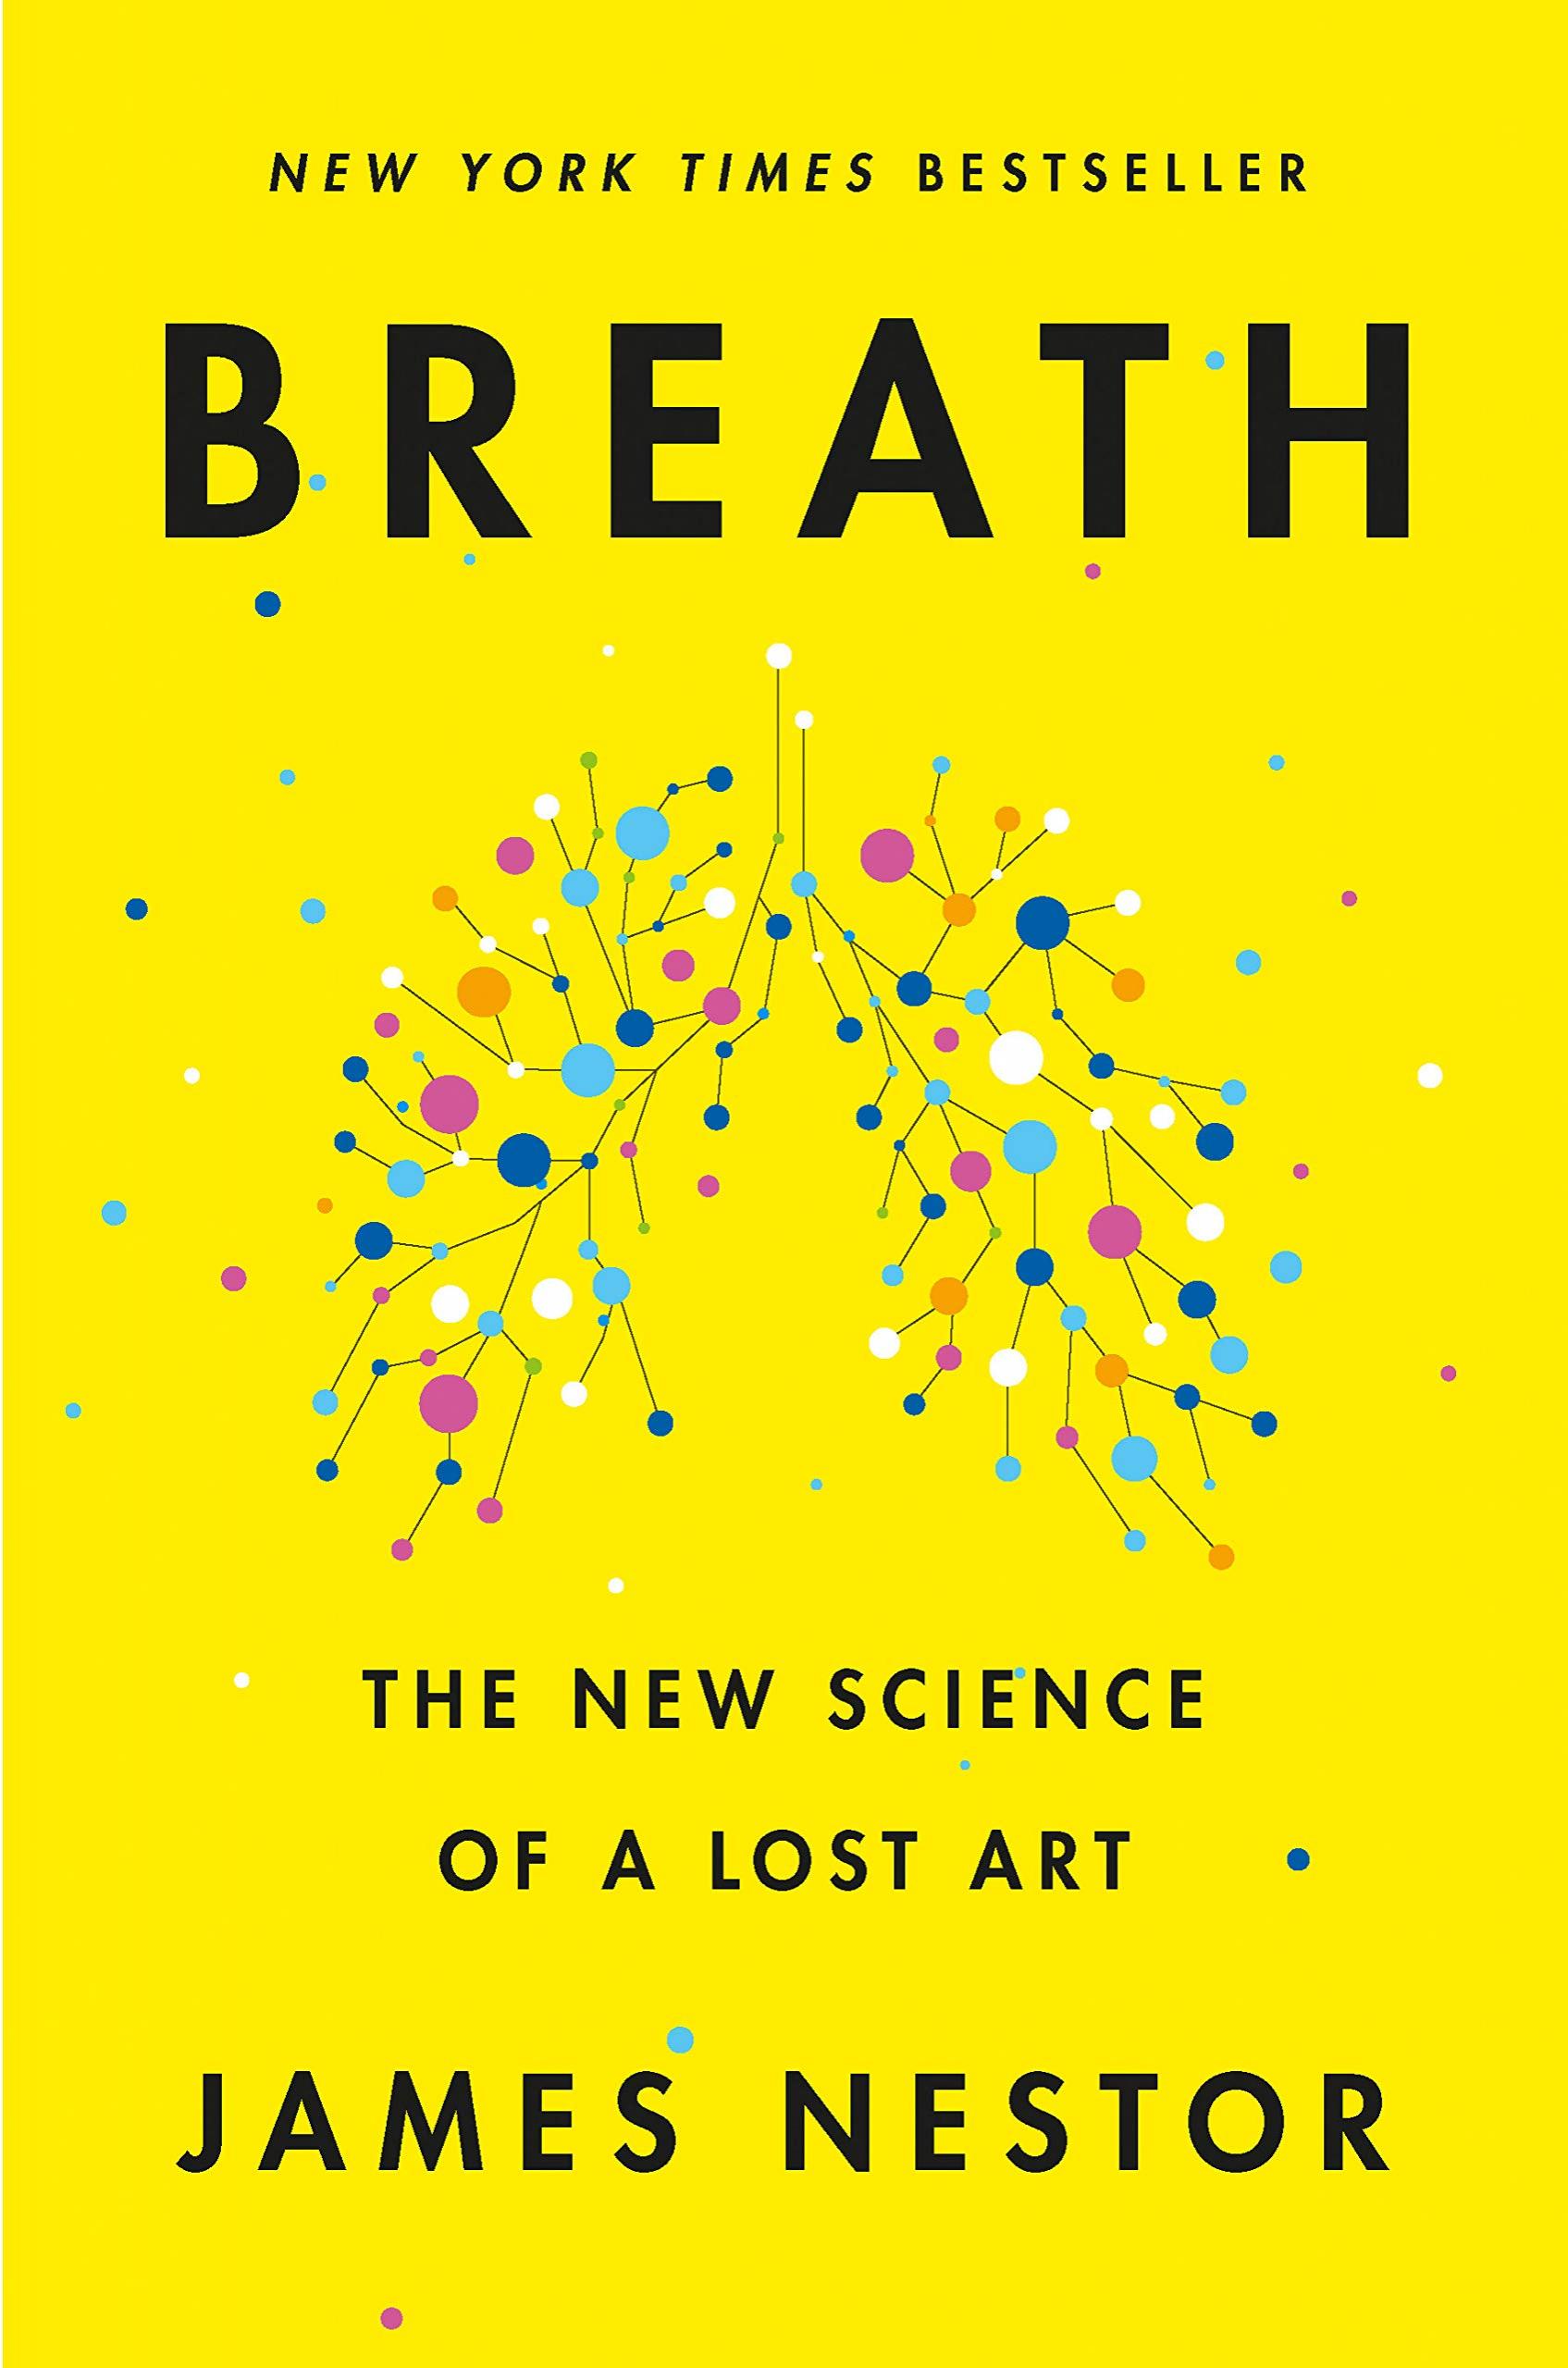 breath book review nytimes